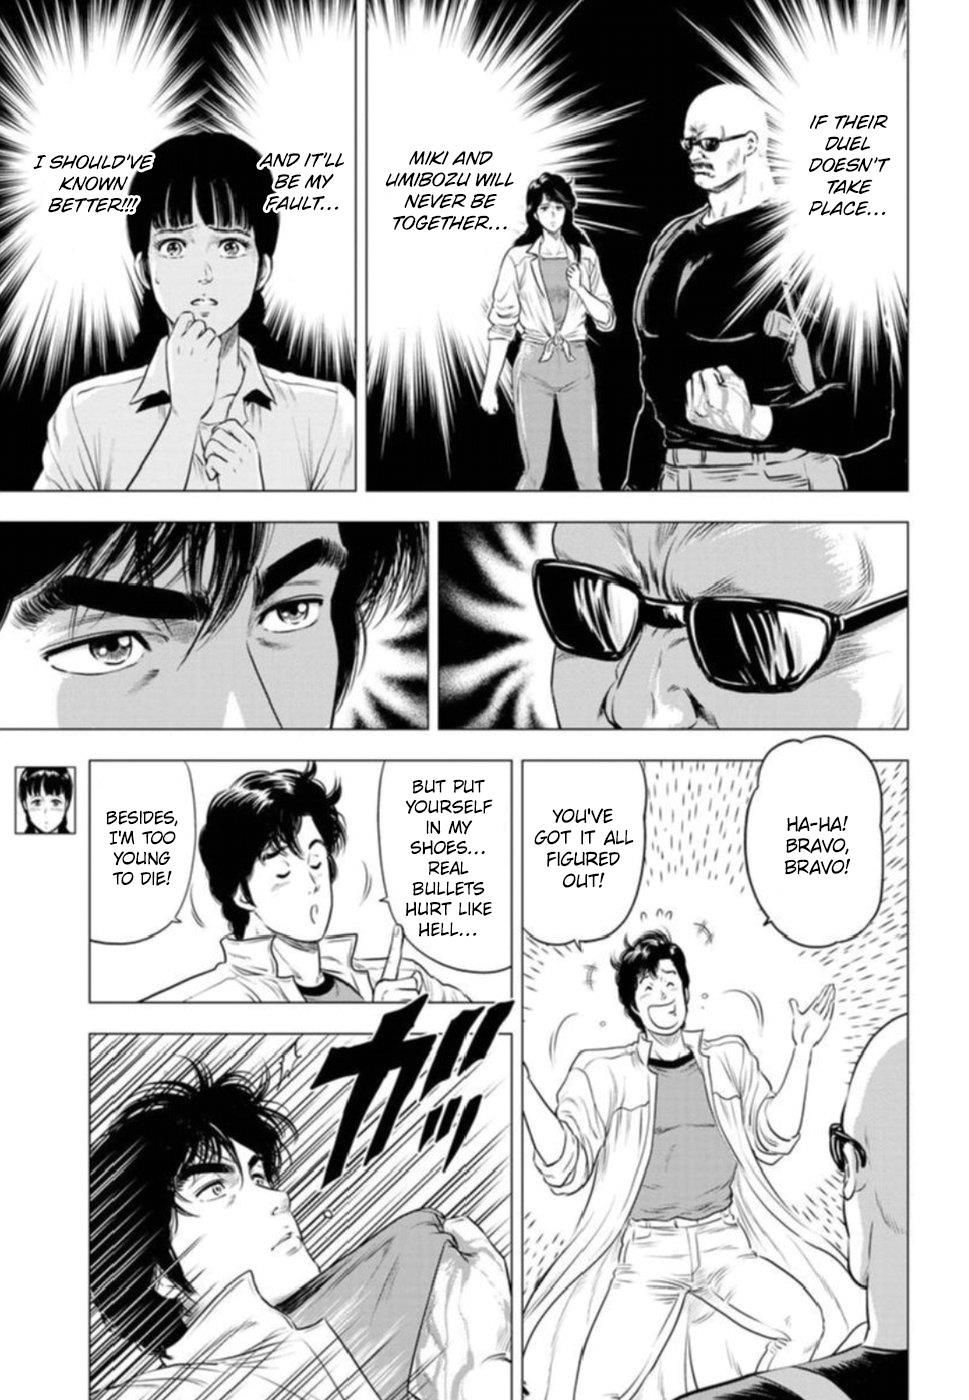 City Hunter - Rebirth Vol.2 Chapter 9: A Sacrifice In The Name Of Love - Picture 3